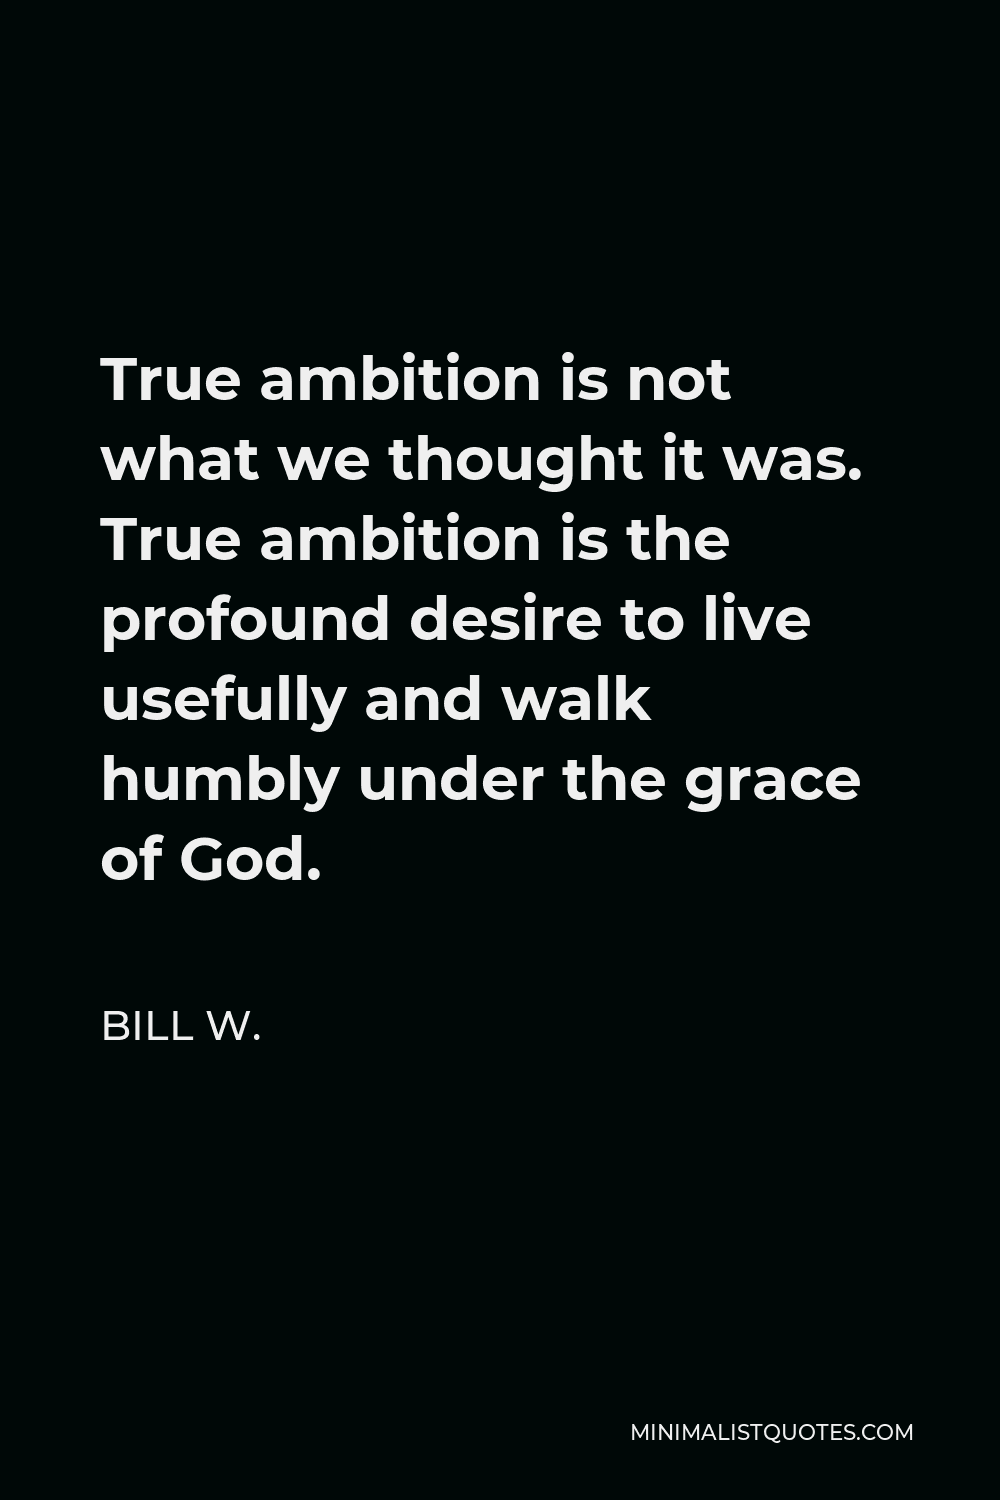 Bill W. Quote - True ambition is not what we thought it was. True ambition is the profound desire to live usefully and walk humbly under the grace of God.